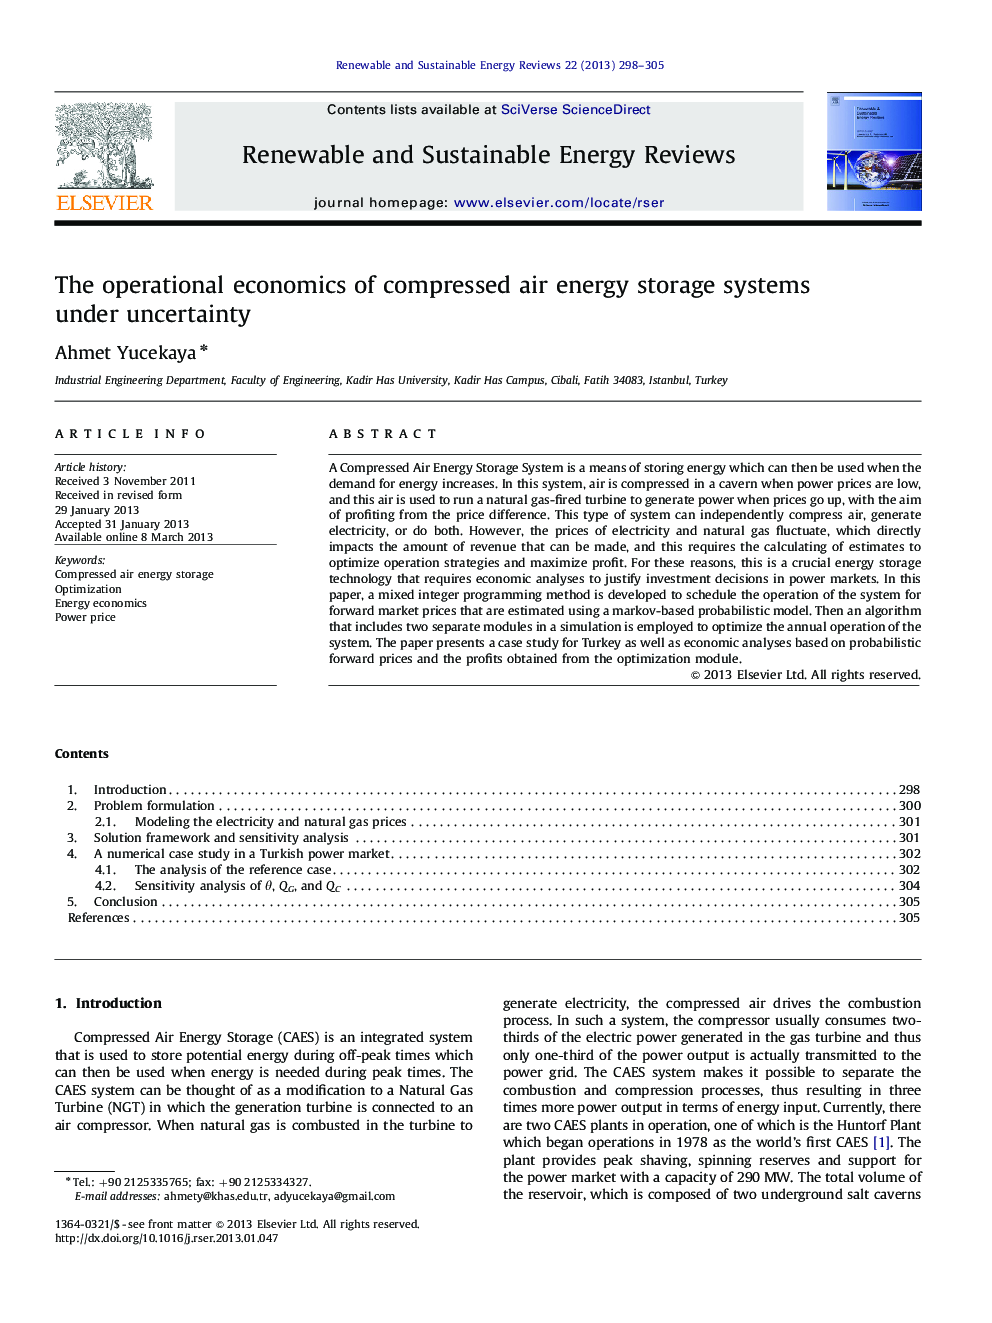 The operational economics of compressed air energy storage systems under uncertainty